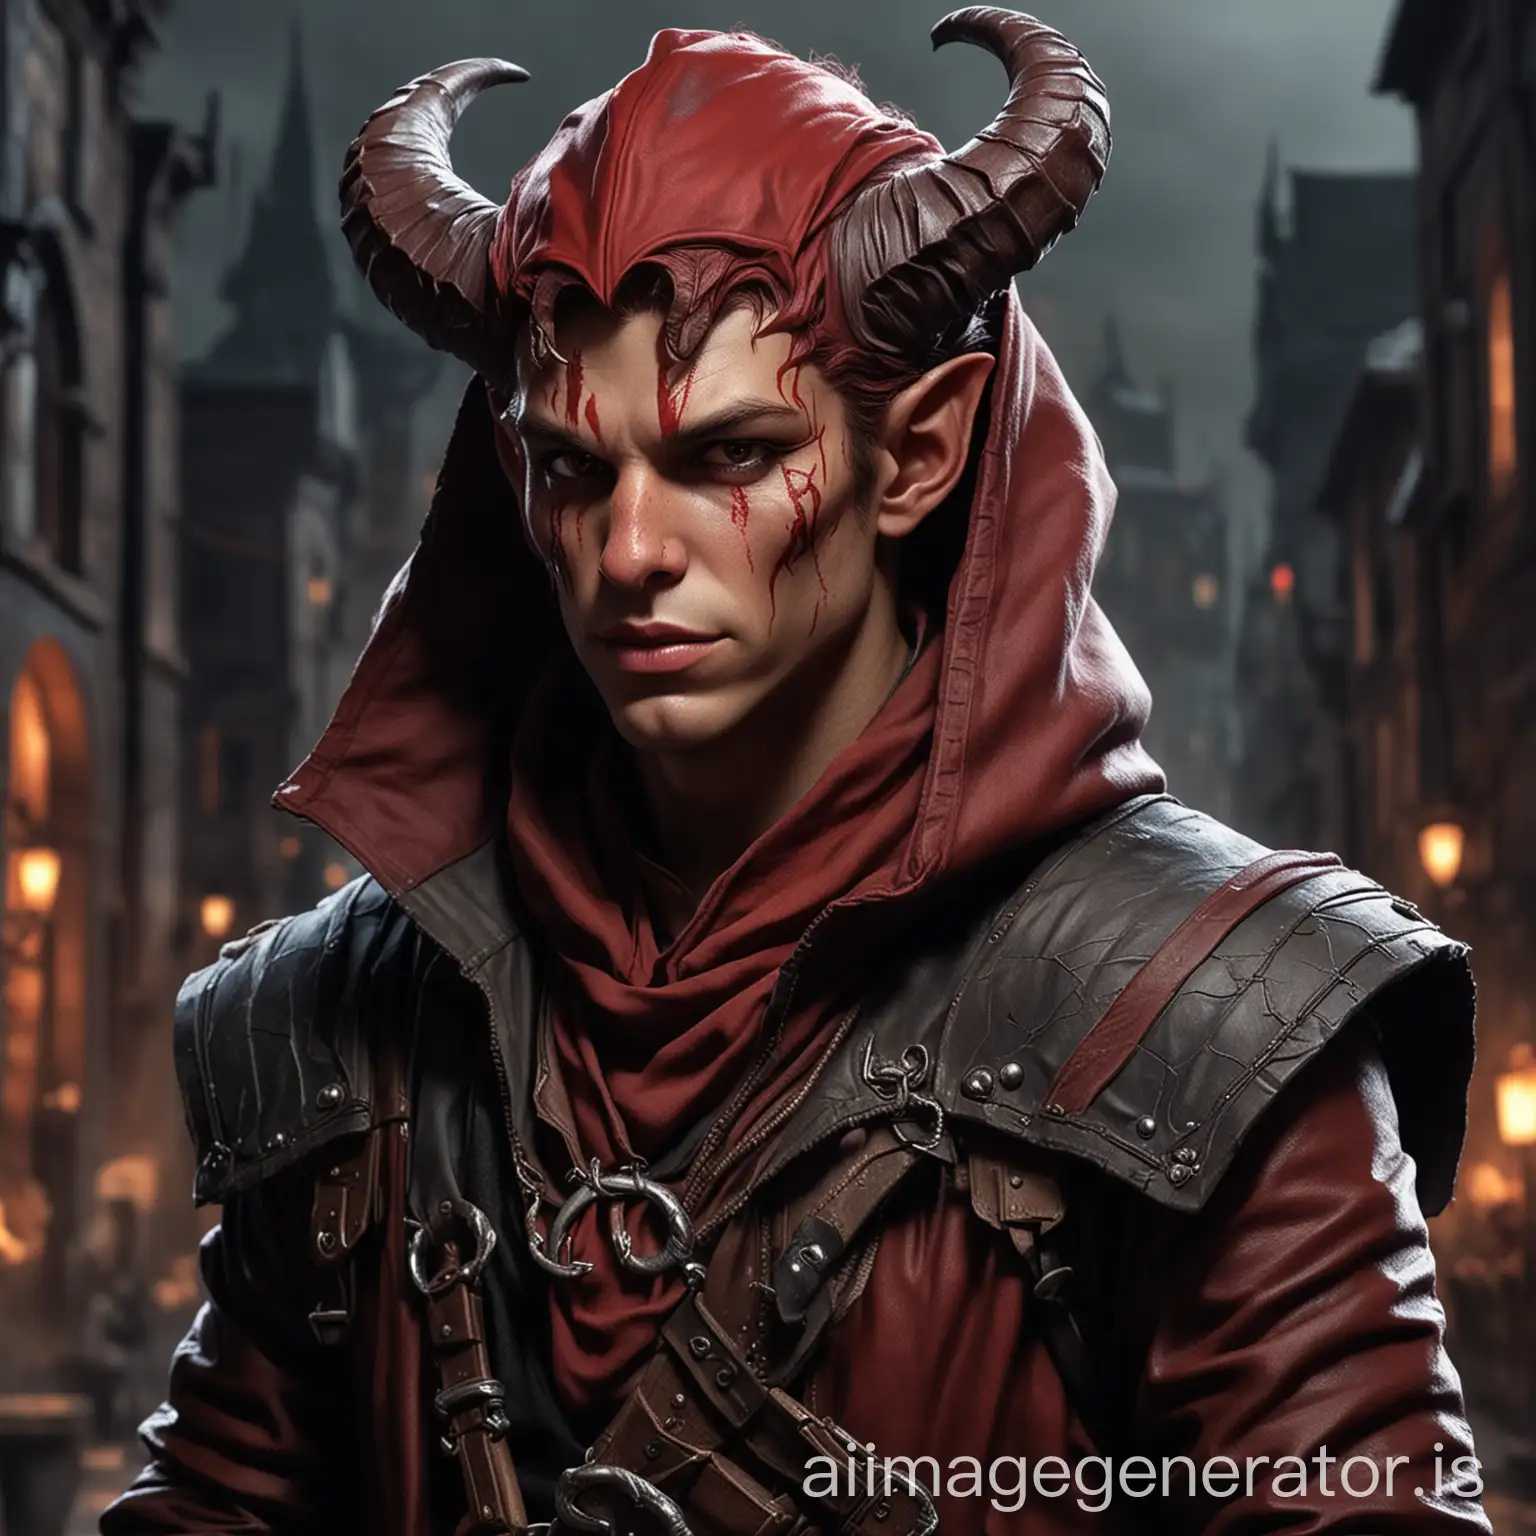 Young-Male-Tiefling-Rogue-in-Urban-Setting-with-Hood-Less-Menacing